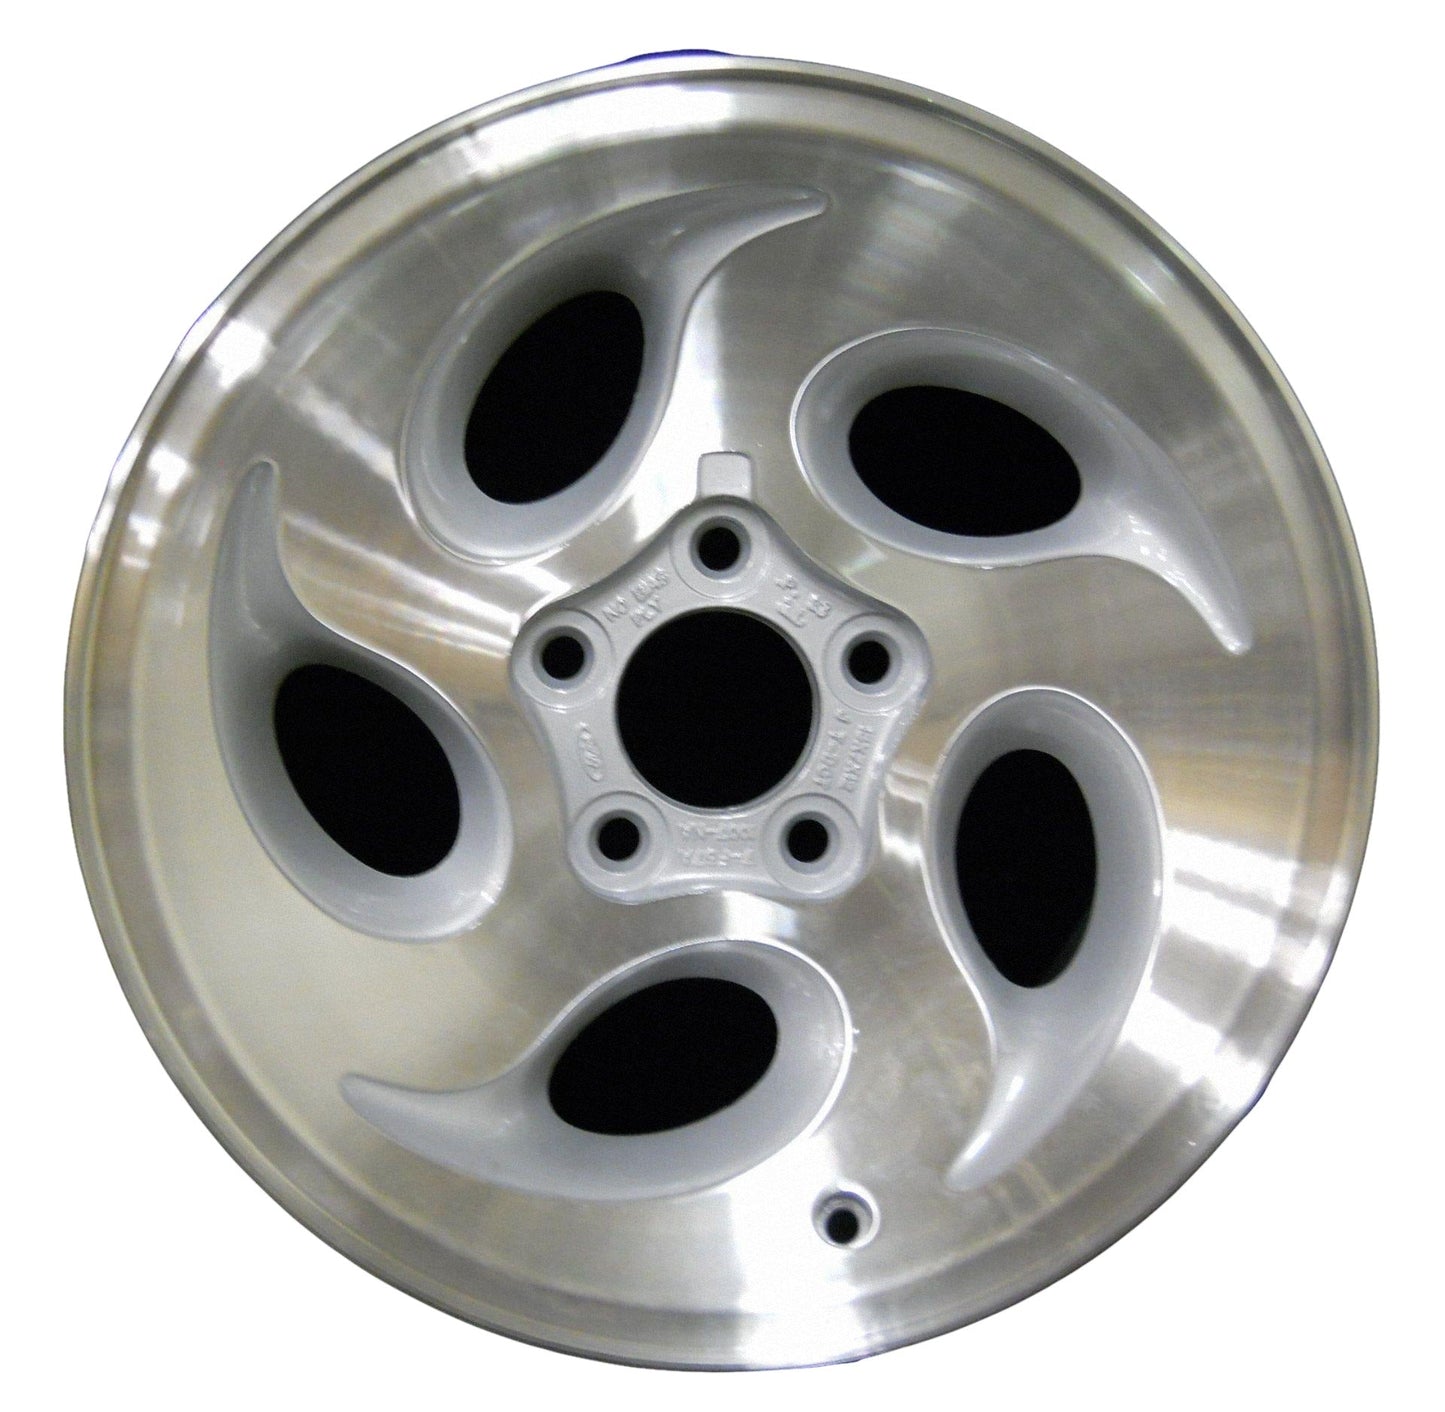 Ford Explorer  1995, 1996, 1997, 1998, 1999, 2000, 2001 Factory OEM Car Wheel Size 15x7 Alloy WAO.3137.PS04.TMA